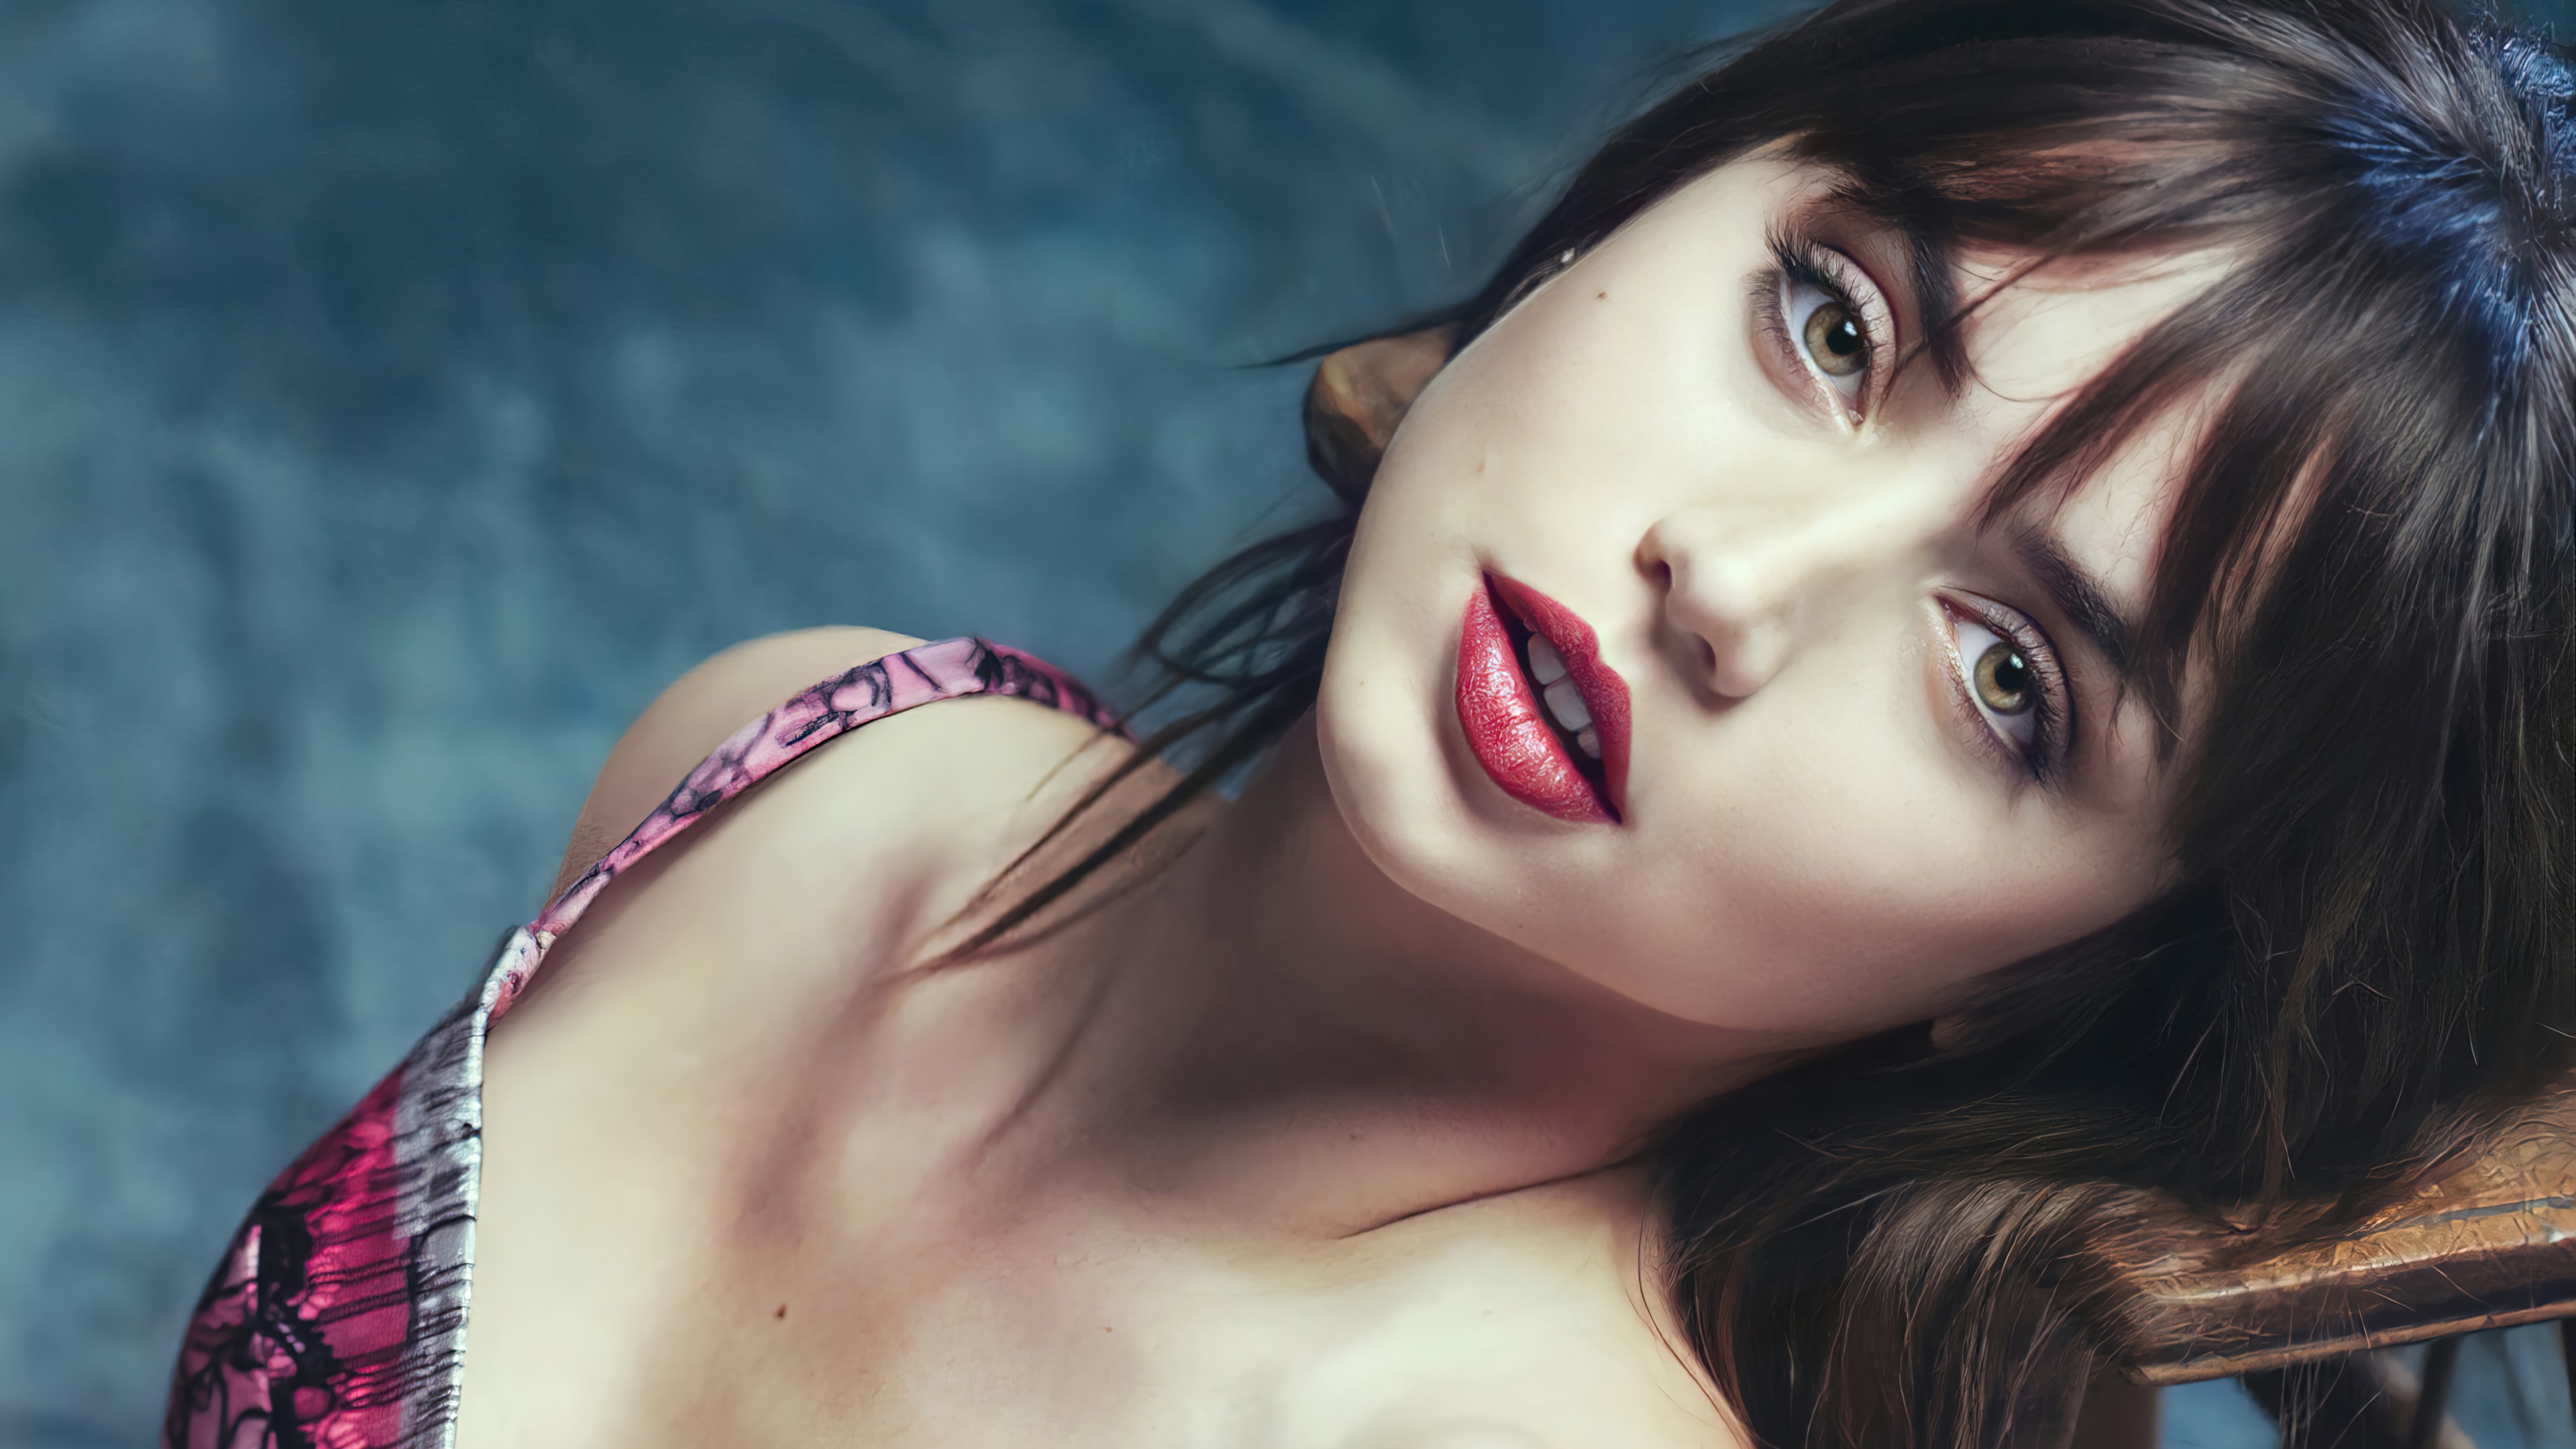 Ana De Armas No Time To Die Wallpapers